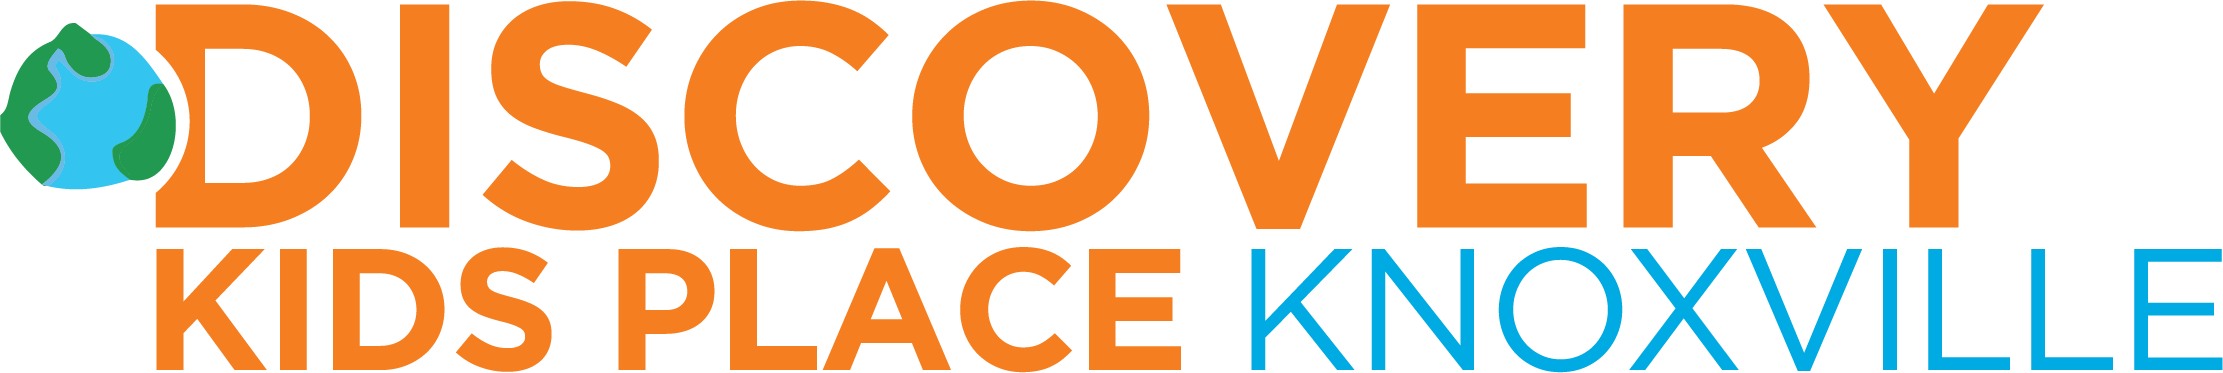 Discovery Kids Place Knoxville logo | Bright Horizons